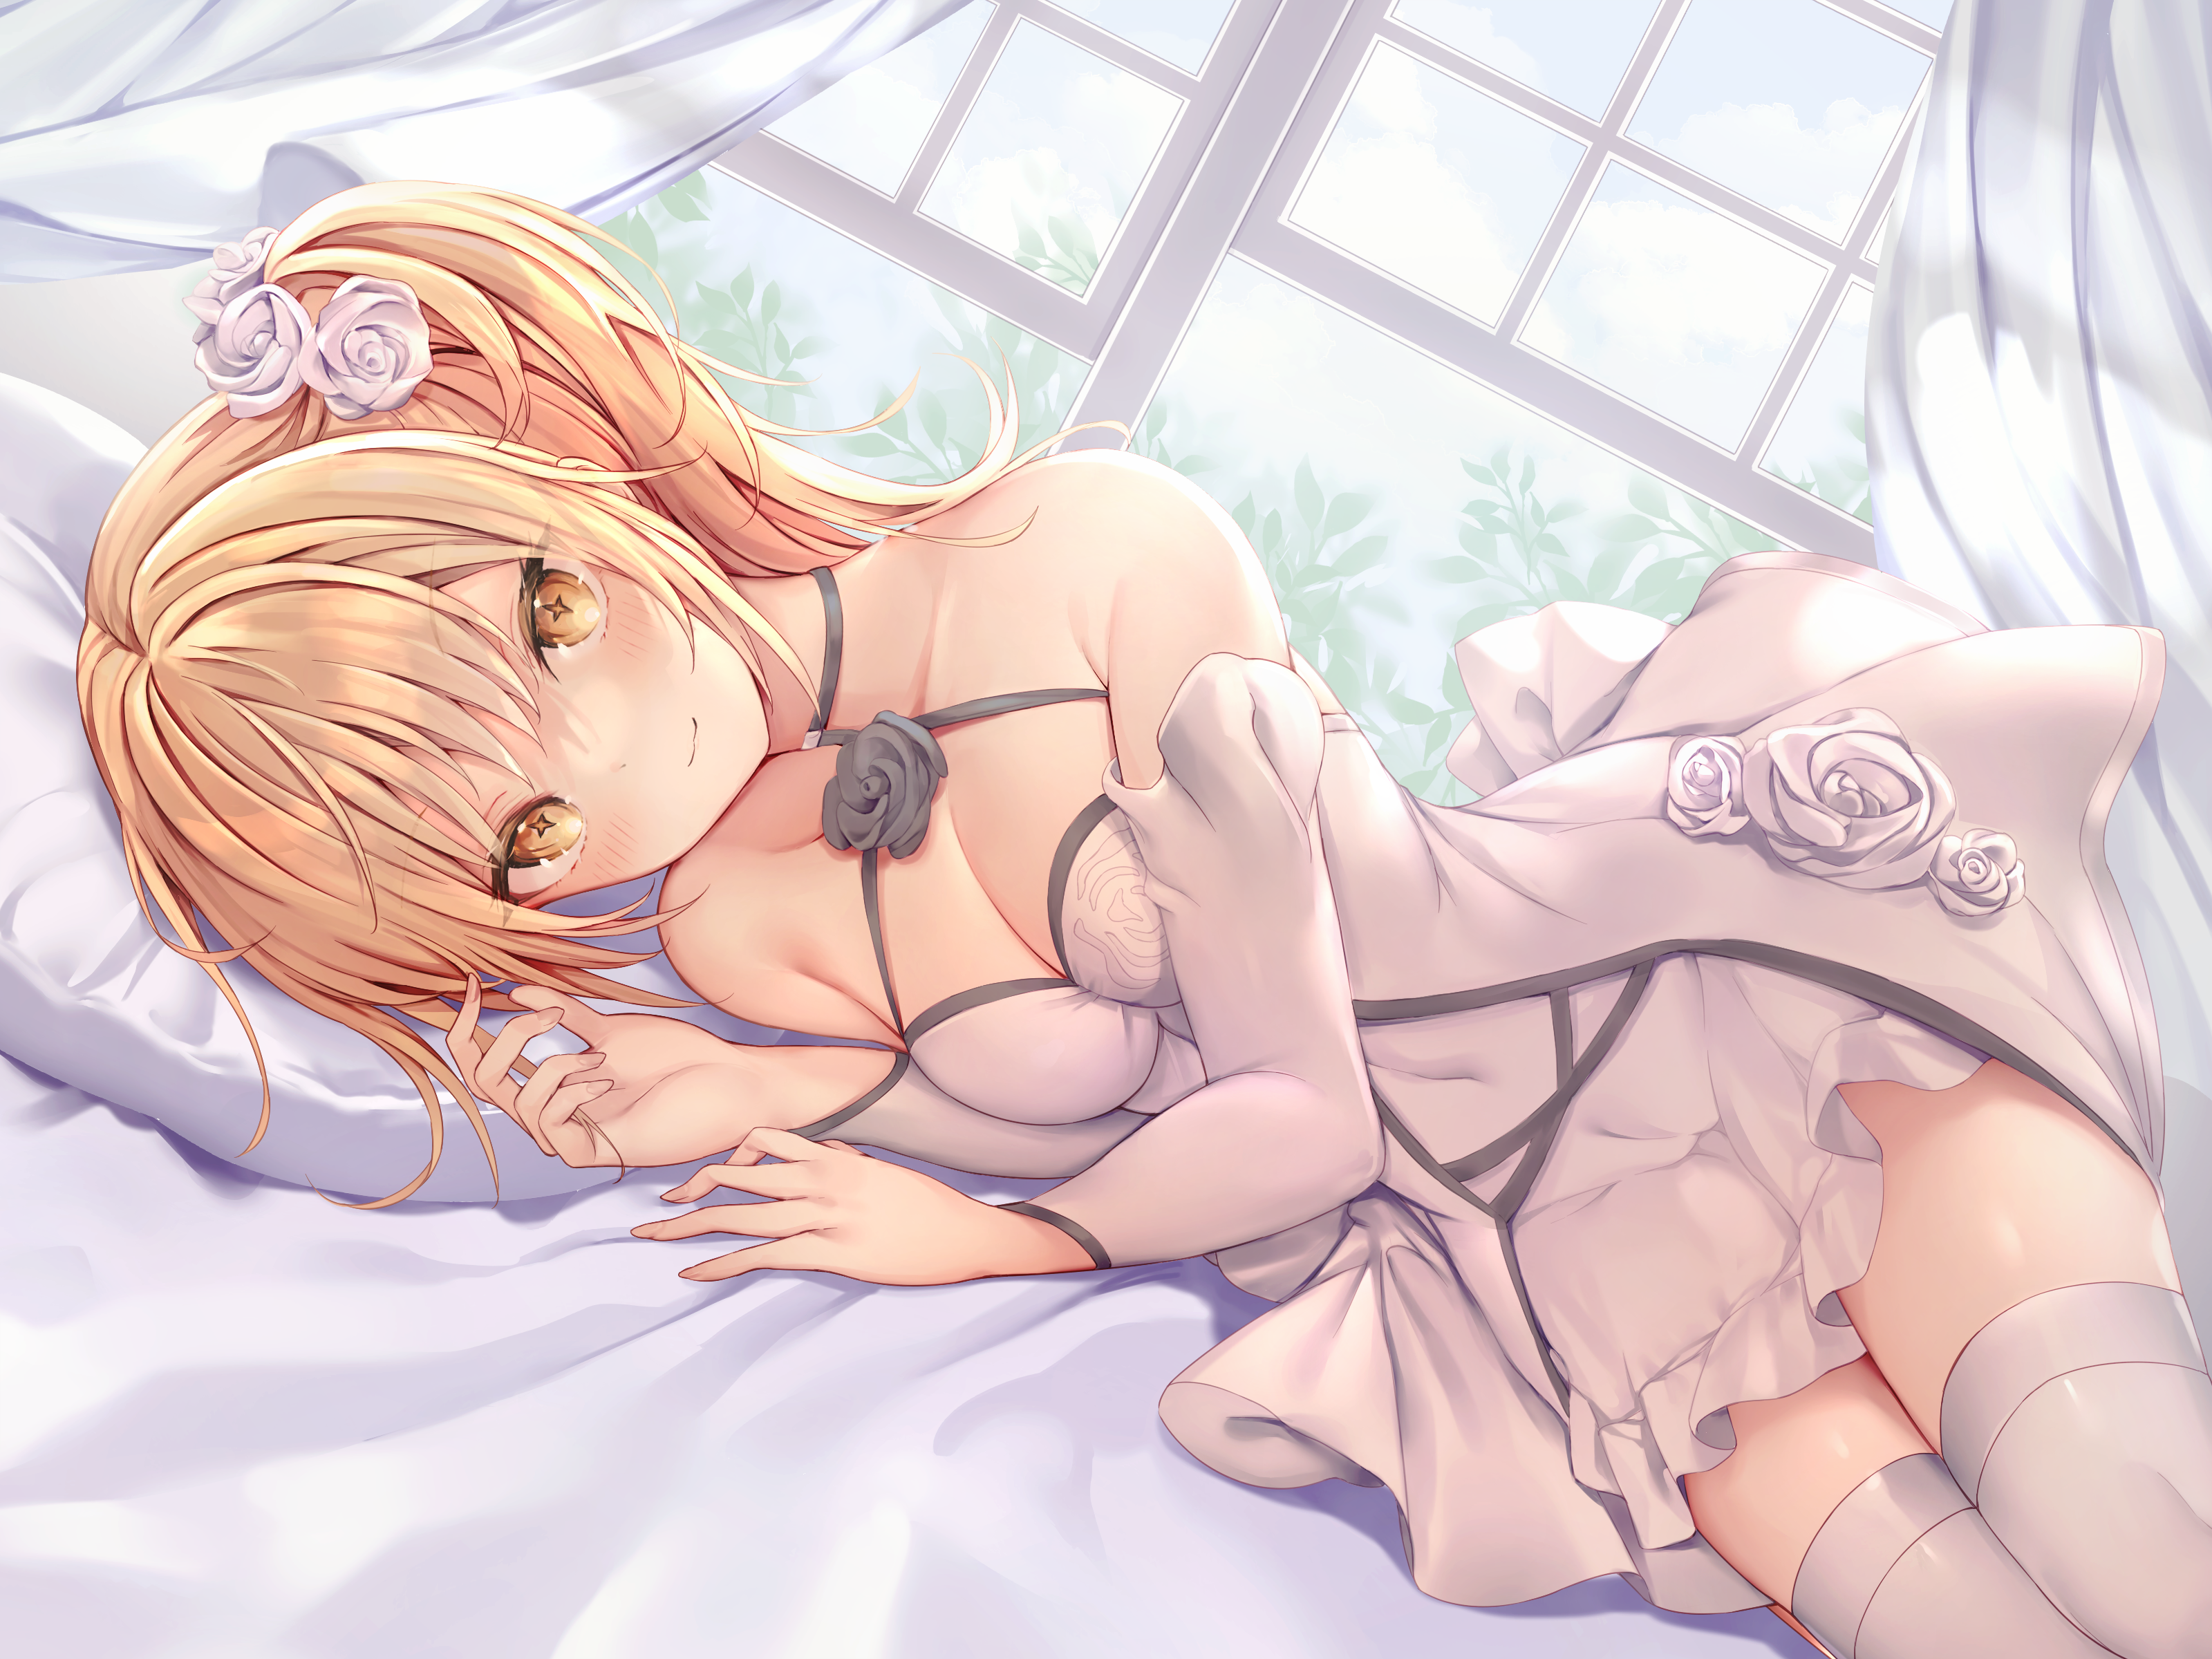 Anime 3200x2400 bed blonde long hair thigh-highs blushing cleavage flower in hair anime girls yellow eyes stockings lying on side flowers